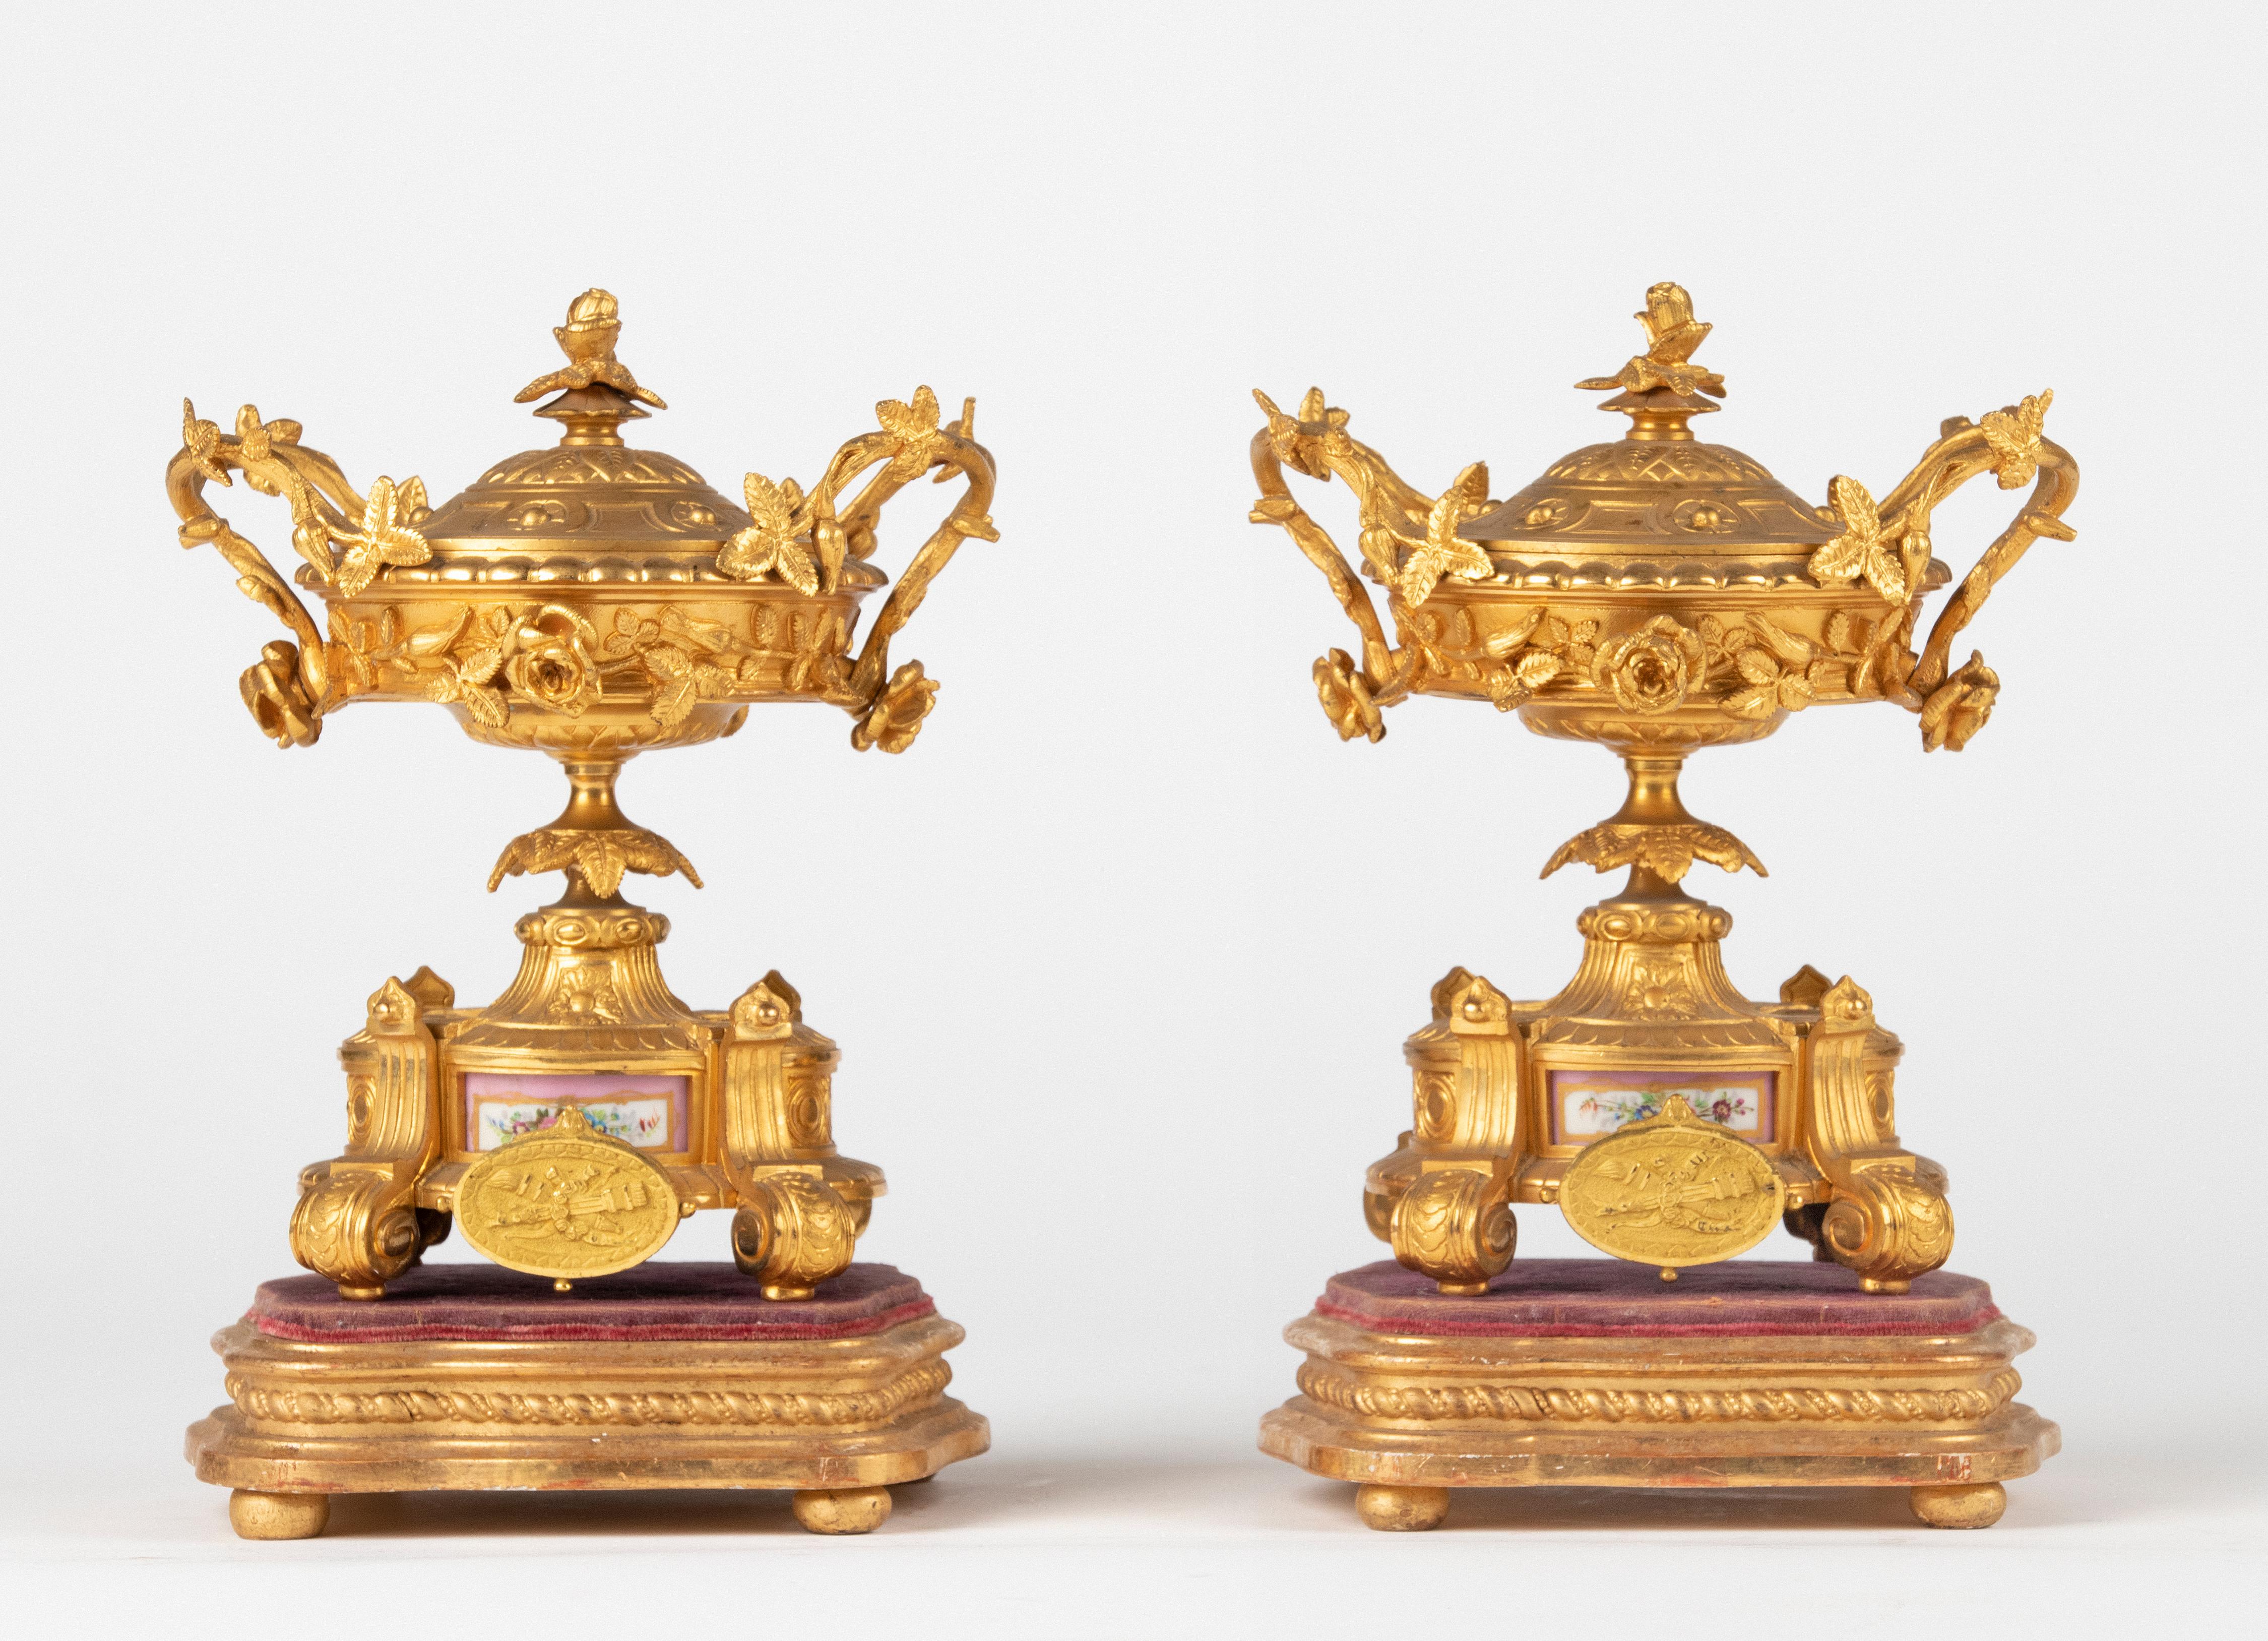 French 19th Century Louis XVI Gilt Bronze and Sèvres Lidded Urns